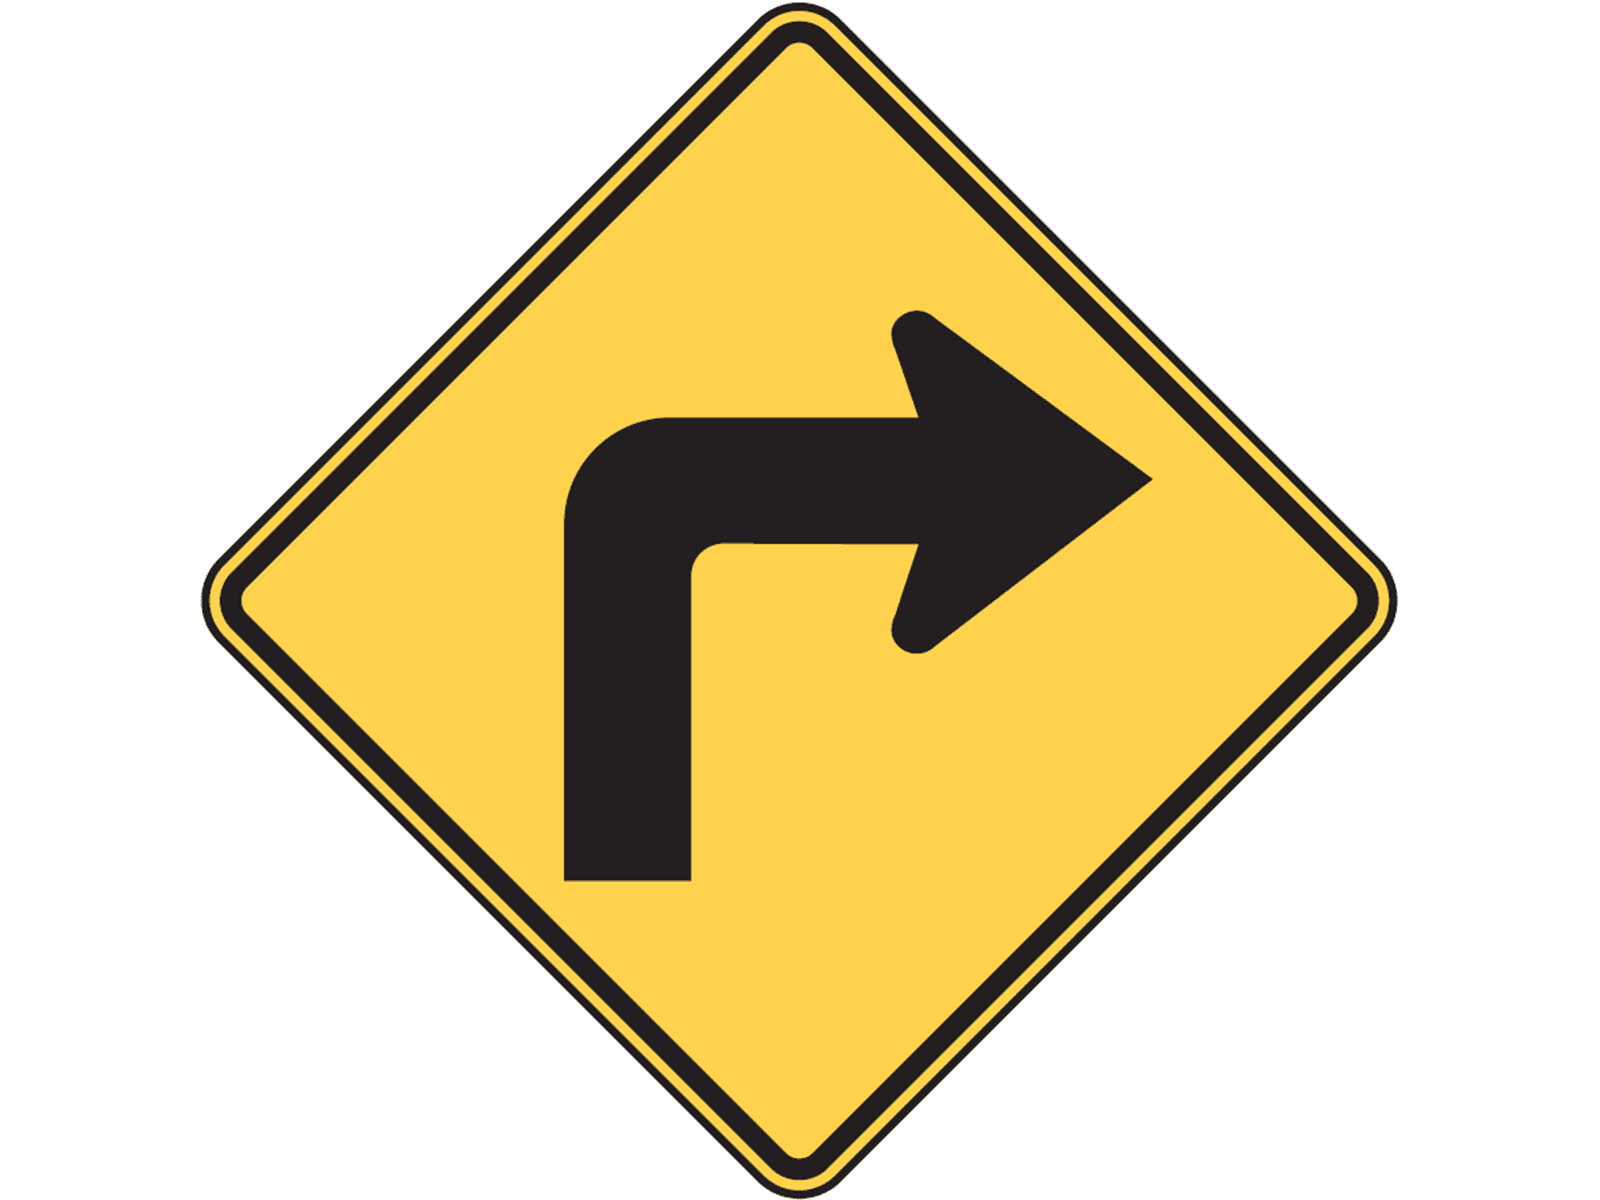 Right Turn W1-1L - W1: Curves and Turns